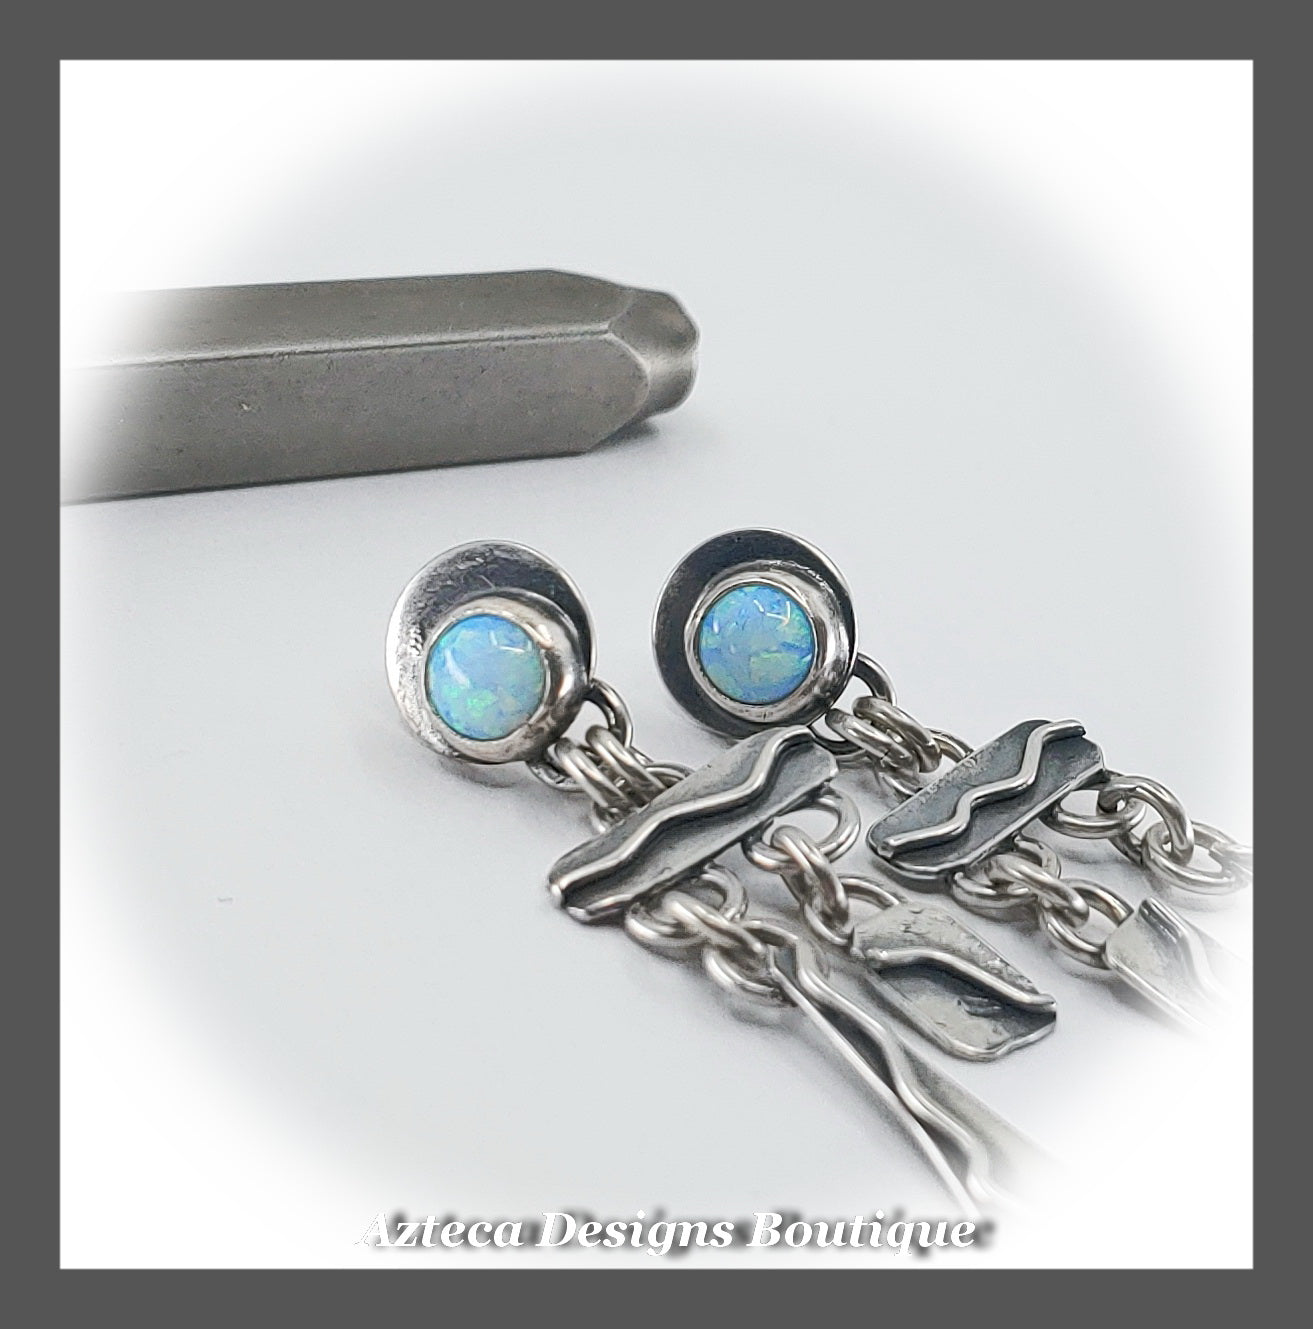 Cultured Sterling Opal + Sterling Silver Hand Fabricated Swingy Post Earrings